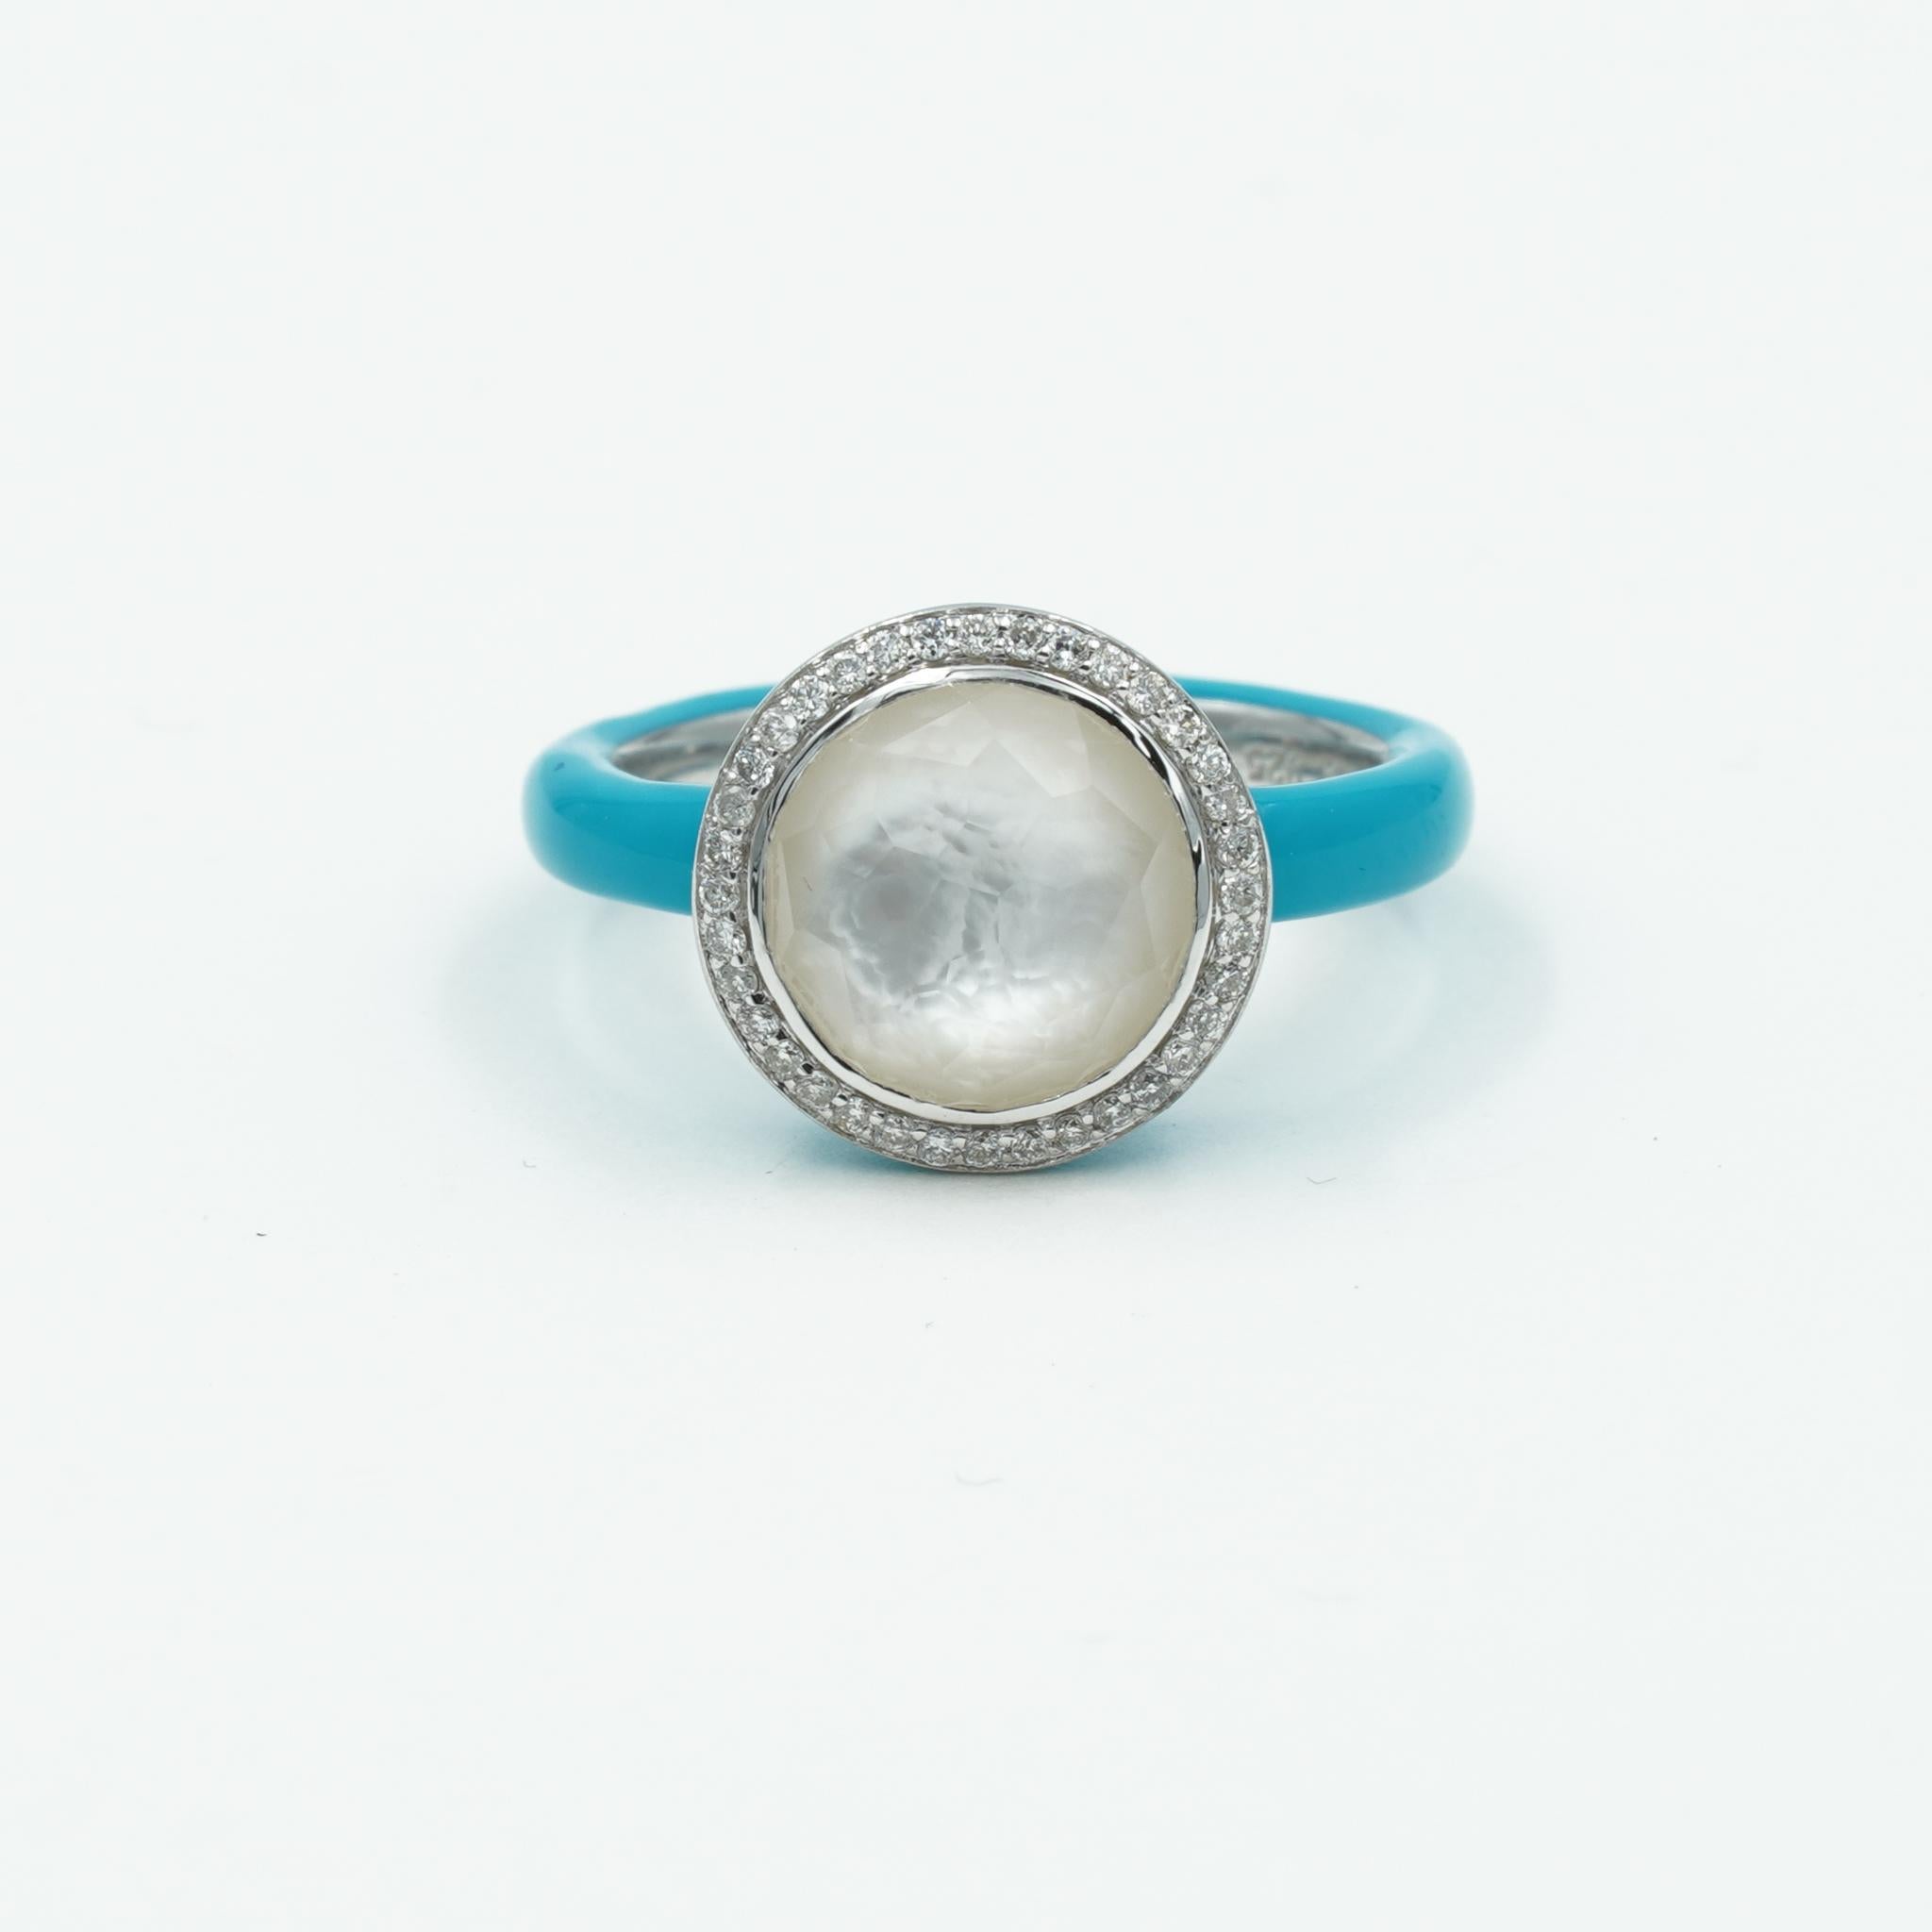 This Carnevale ring is part of the Lollipop® collection by Ippolita and features 0.16 carats of round brilliant cut diamonds surrounding the clear quartz center with a delicate shimmer of mother of pearl, crafted in sterling silver. This ring is on